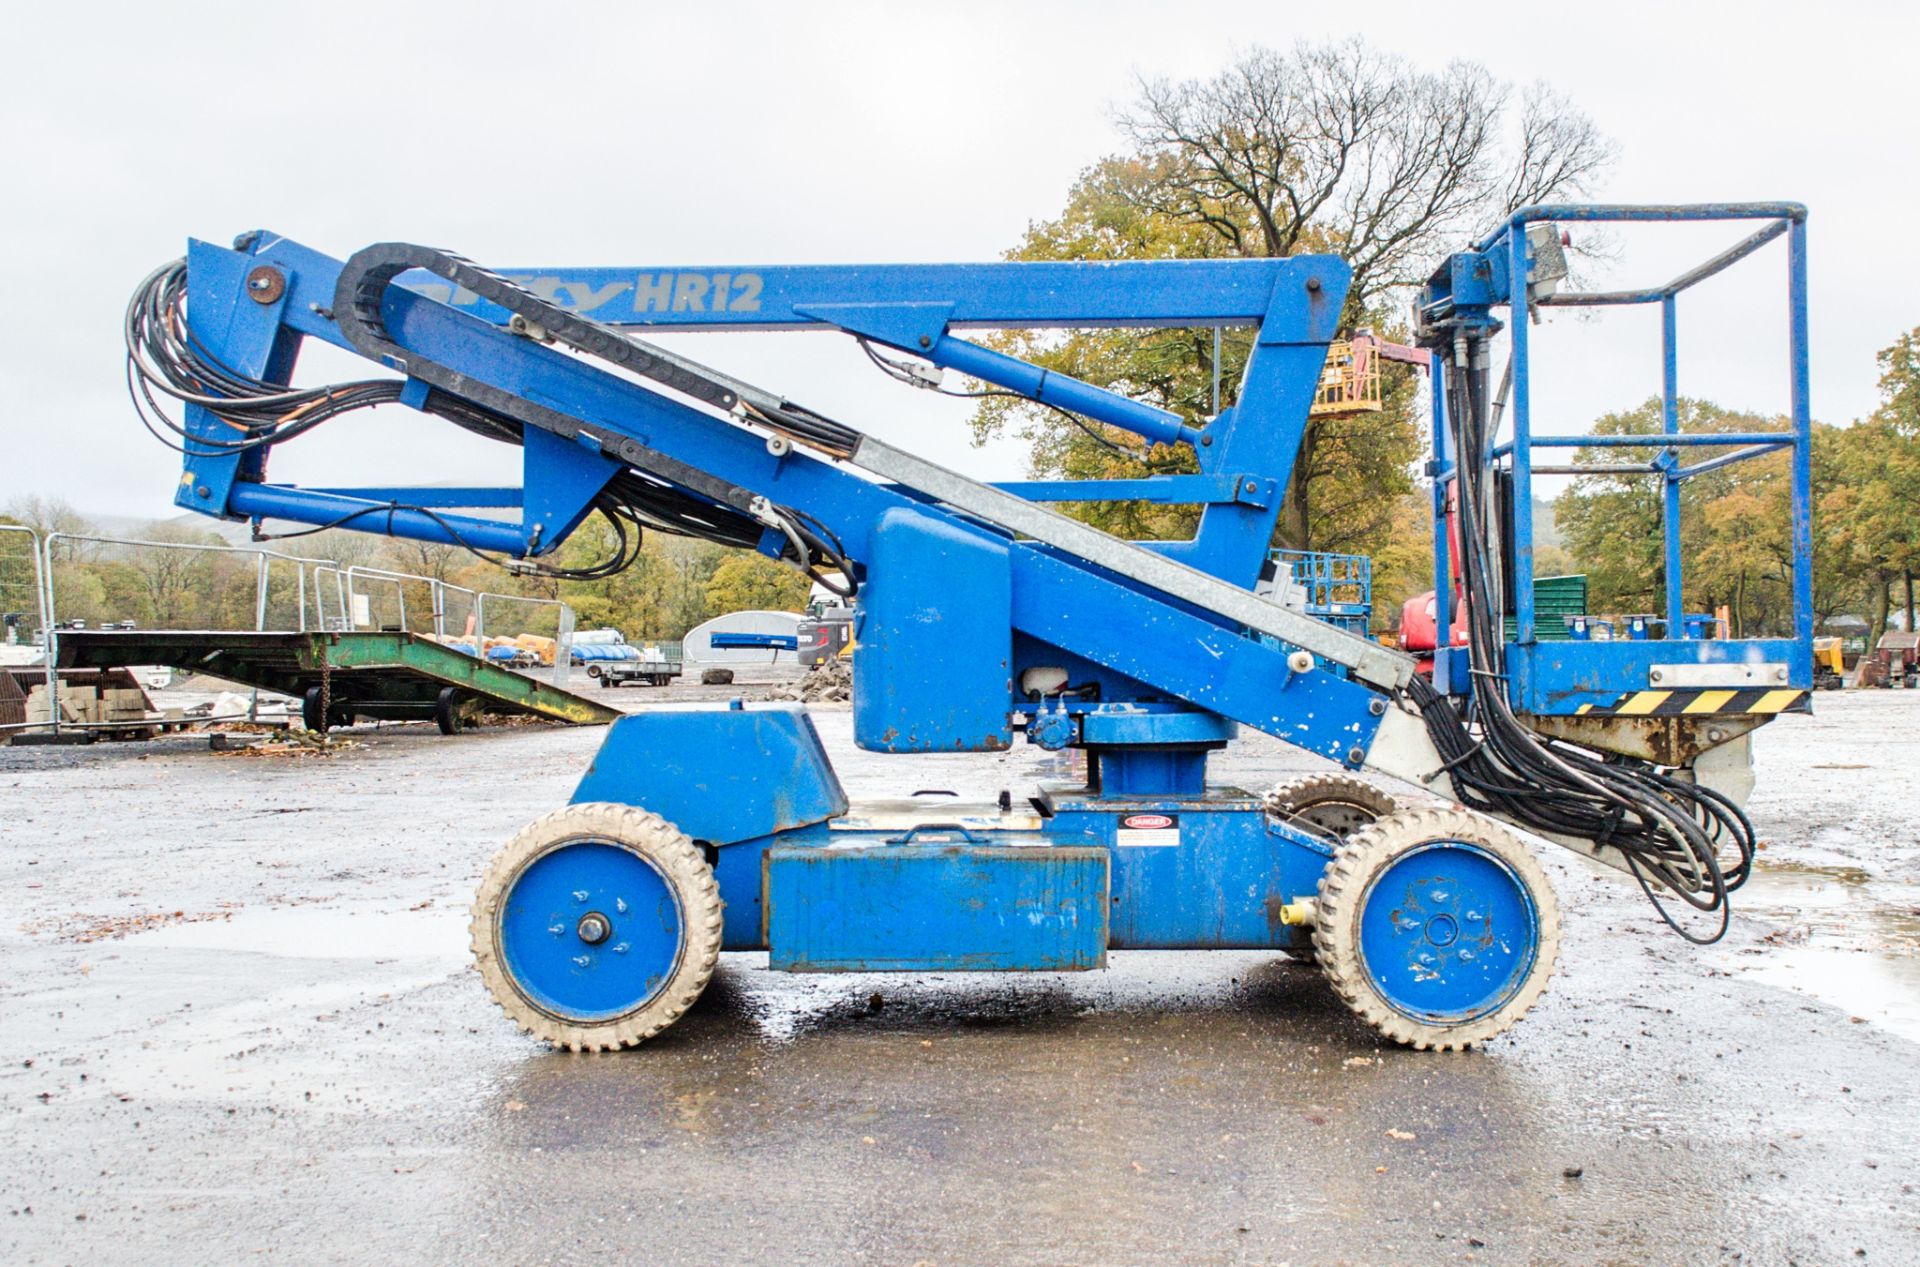 Nifty HR12 NDE 12 metre battery/diesel articulated boom access platform Year: 2008 S/N: 17679 - Image 6 of 12